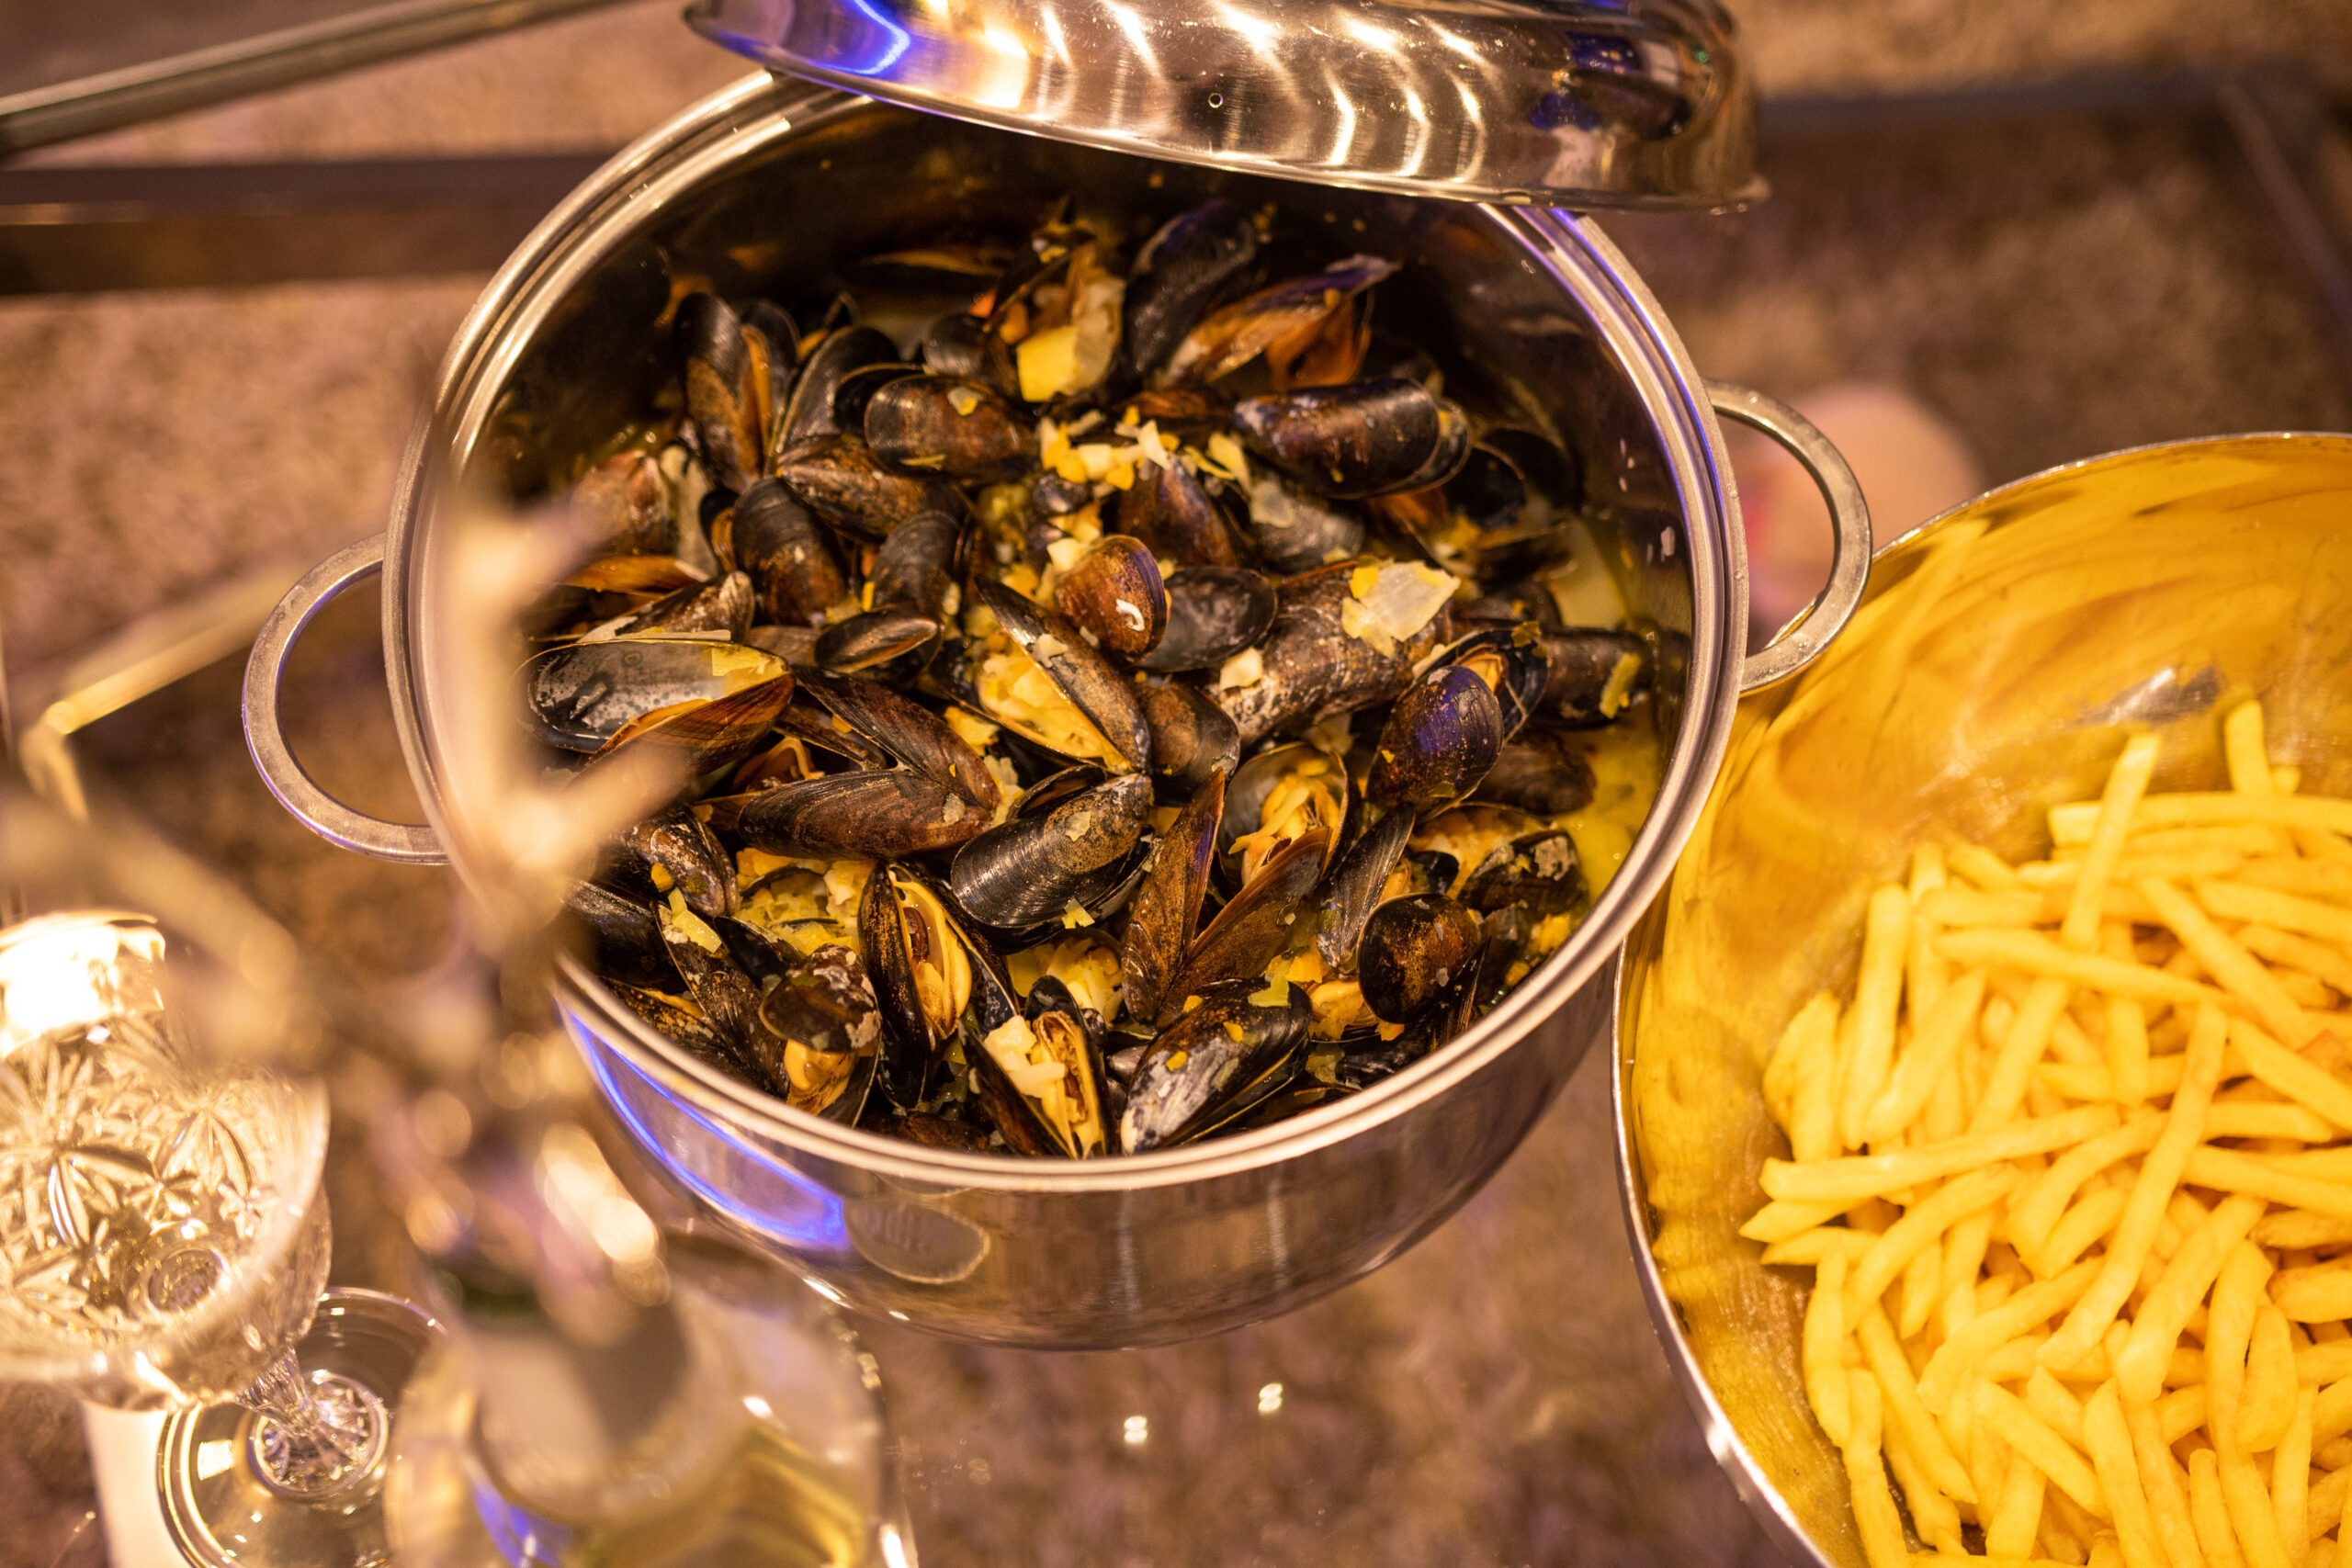 Mussels in white wine cream stock (Moules Frites)